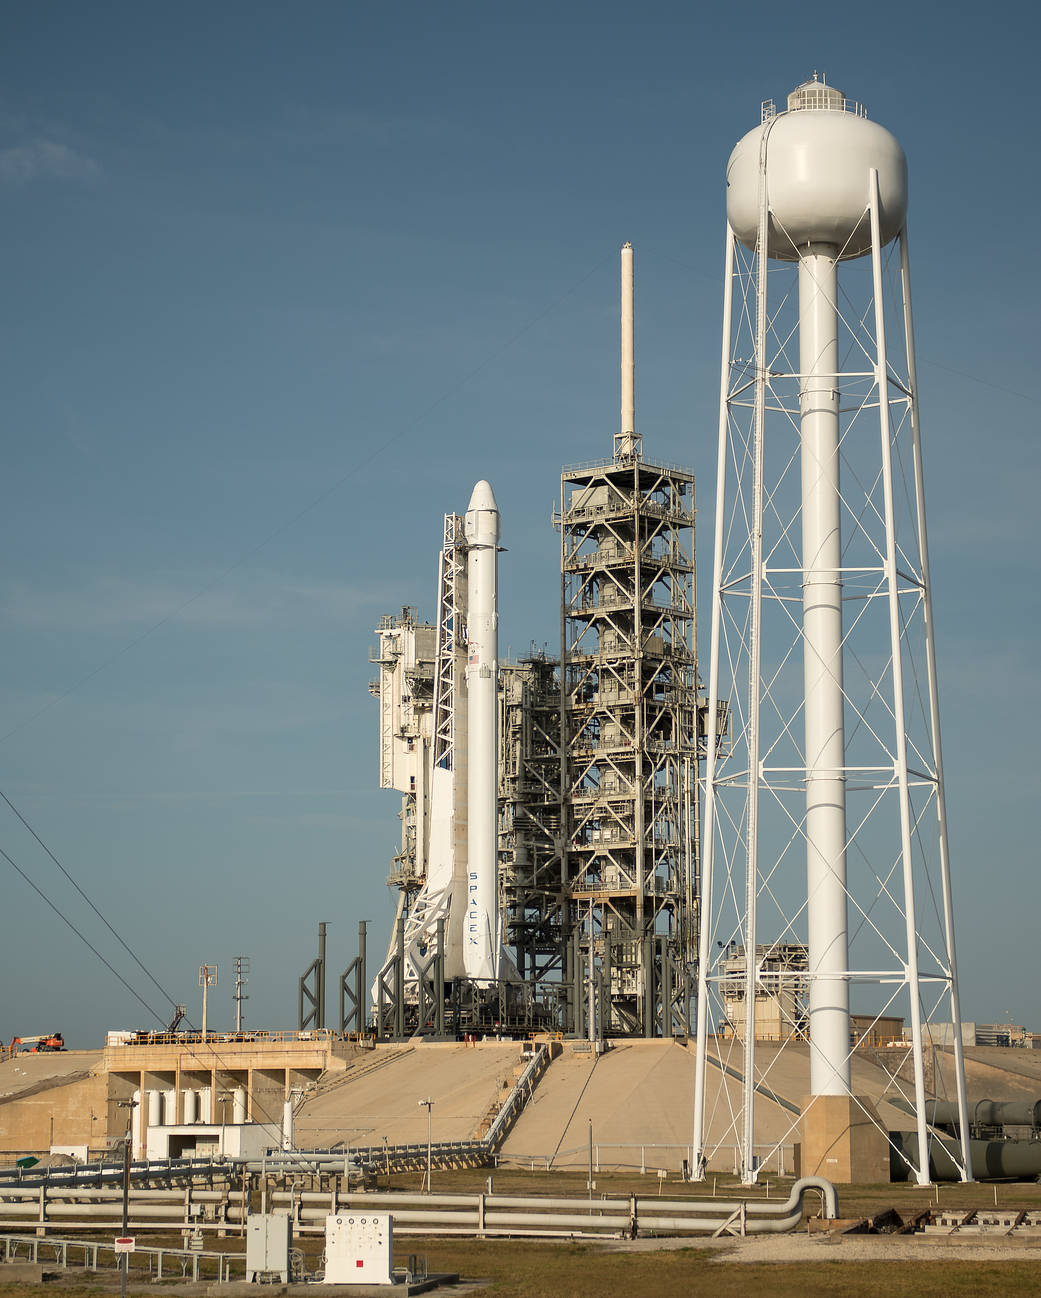 SpaceX Falcon 9 rocket vertical at launch pad